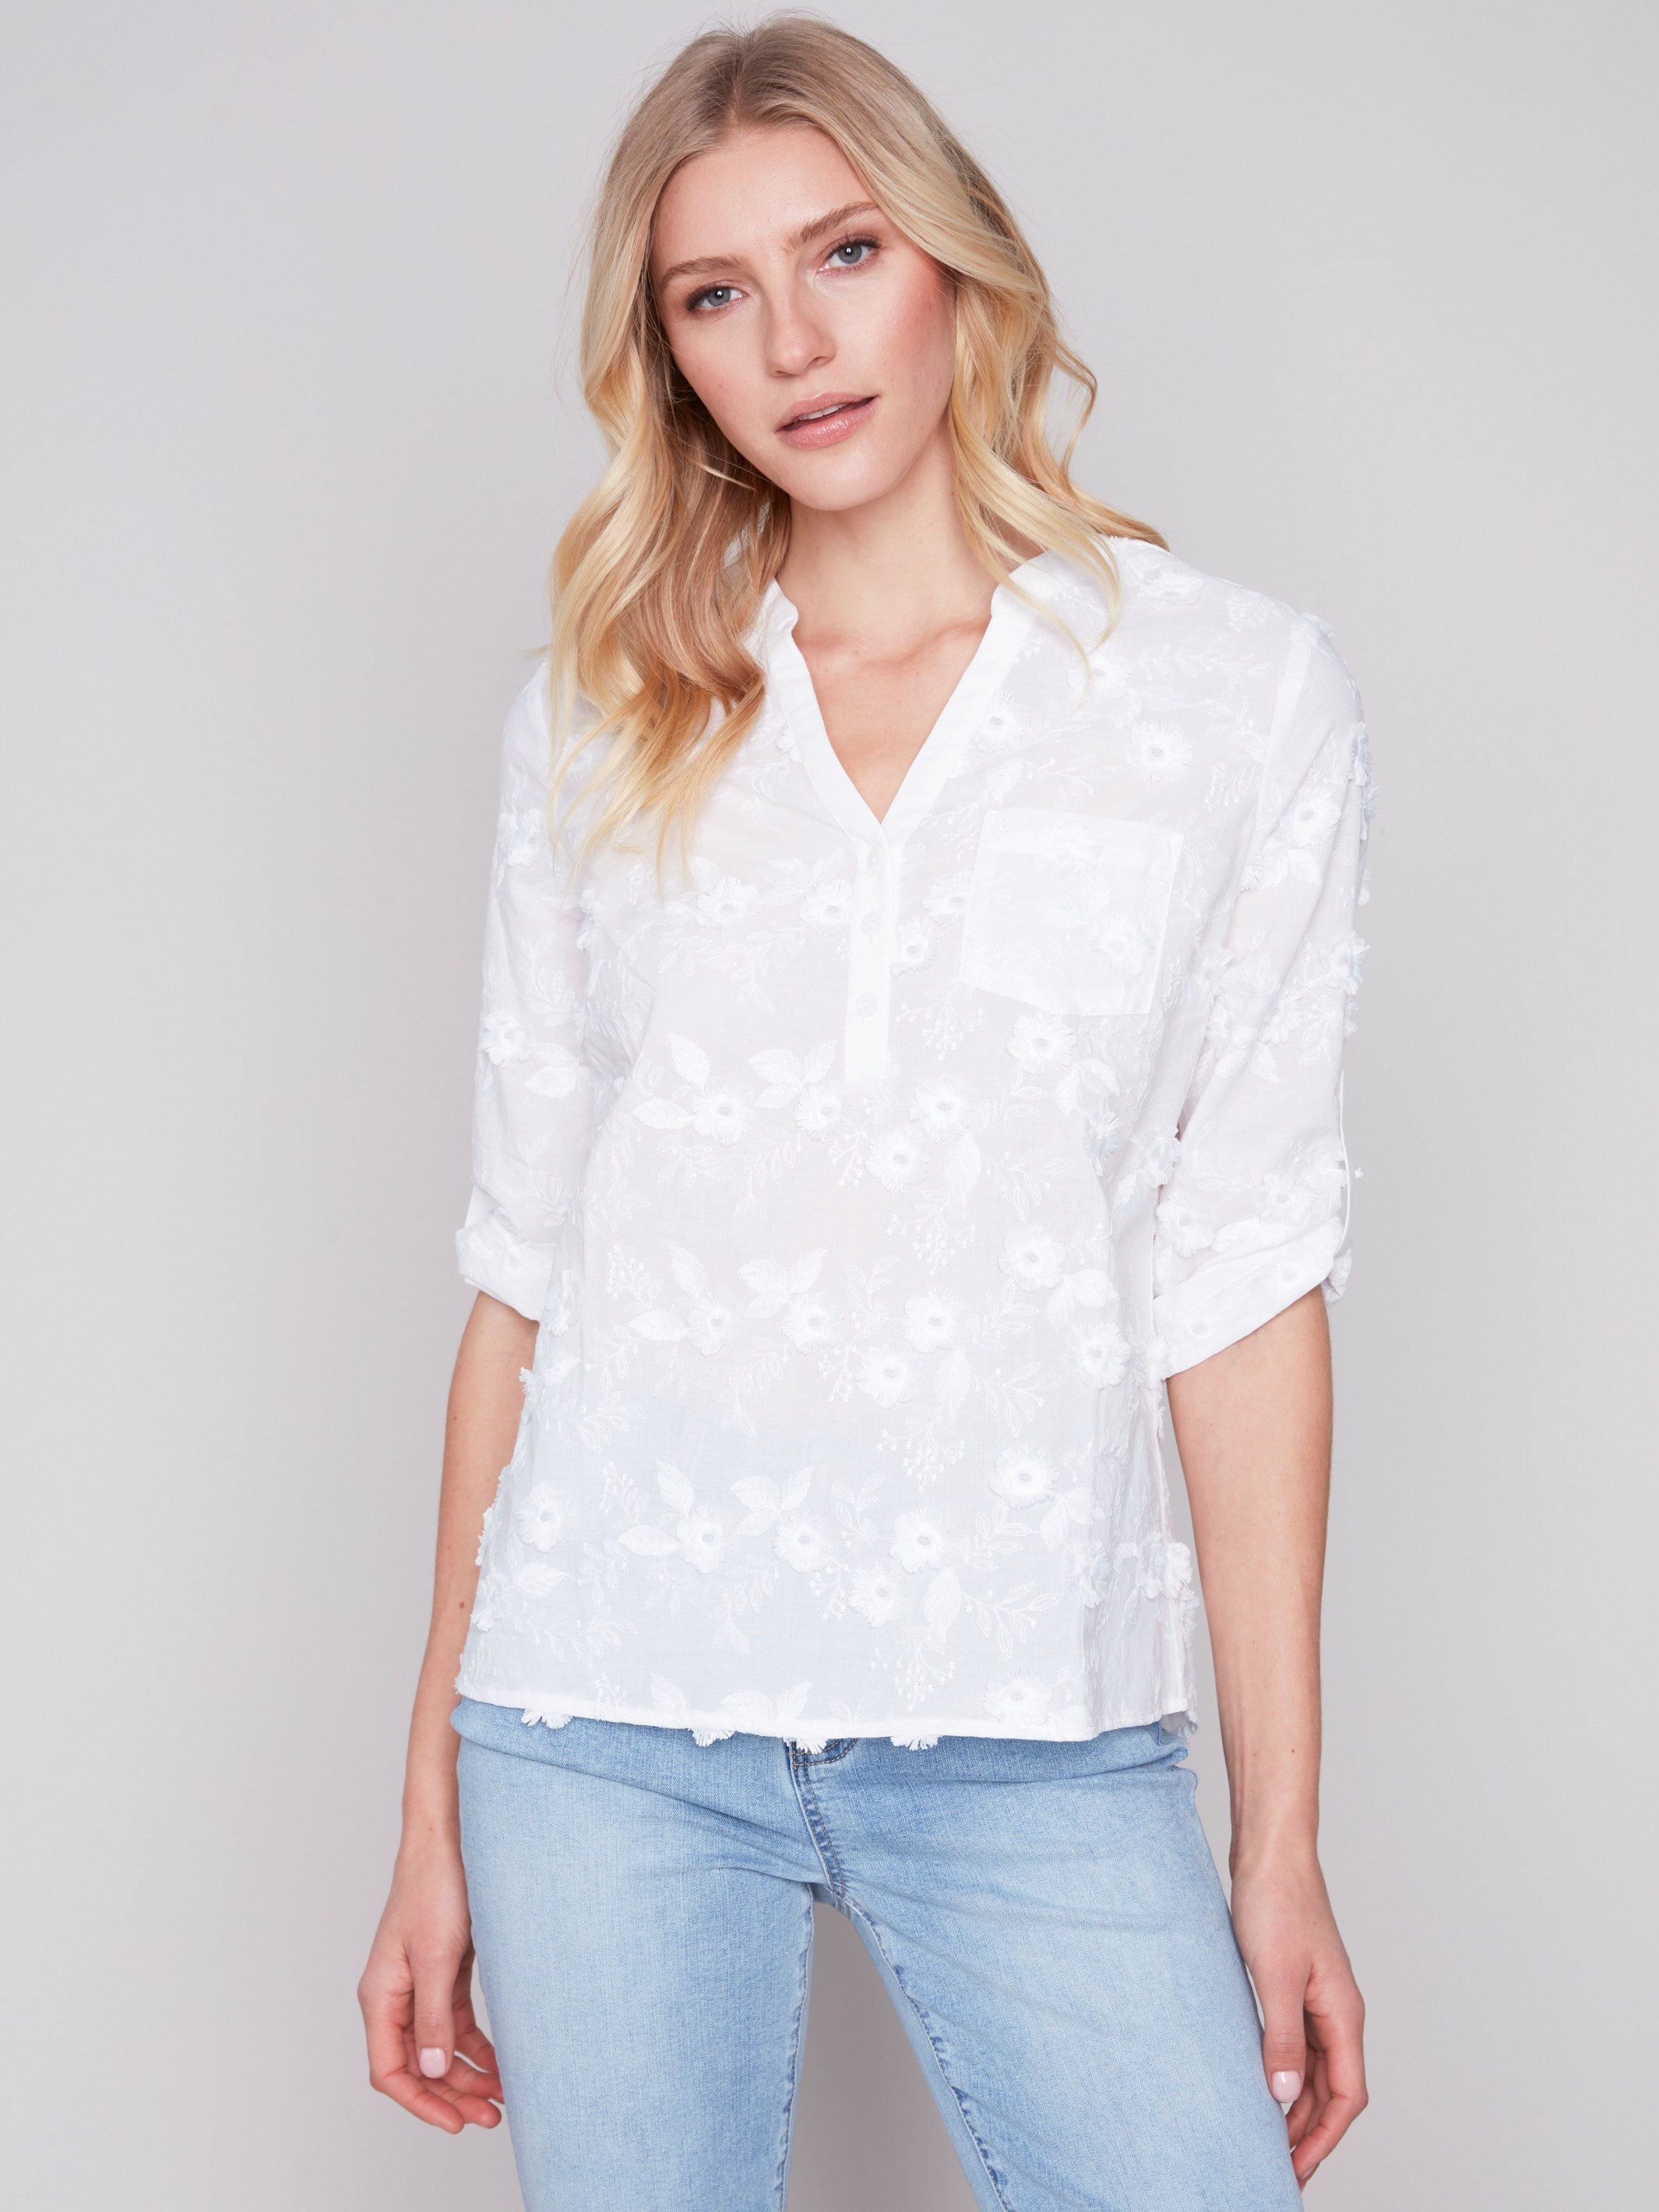 Half-Button Embroidered Cotton Blouse - White - Charlie B Collection Canada - Image 4